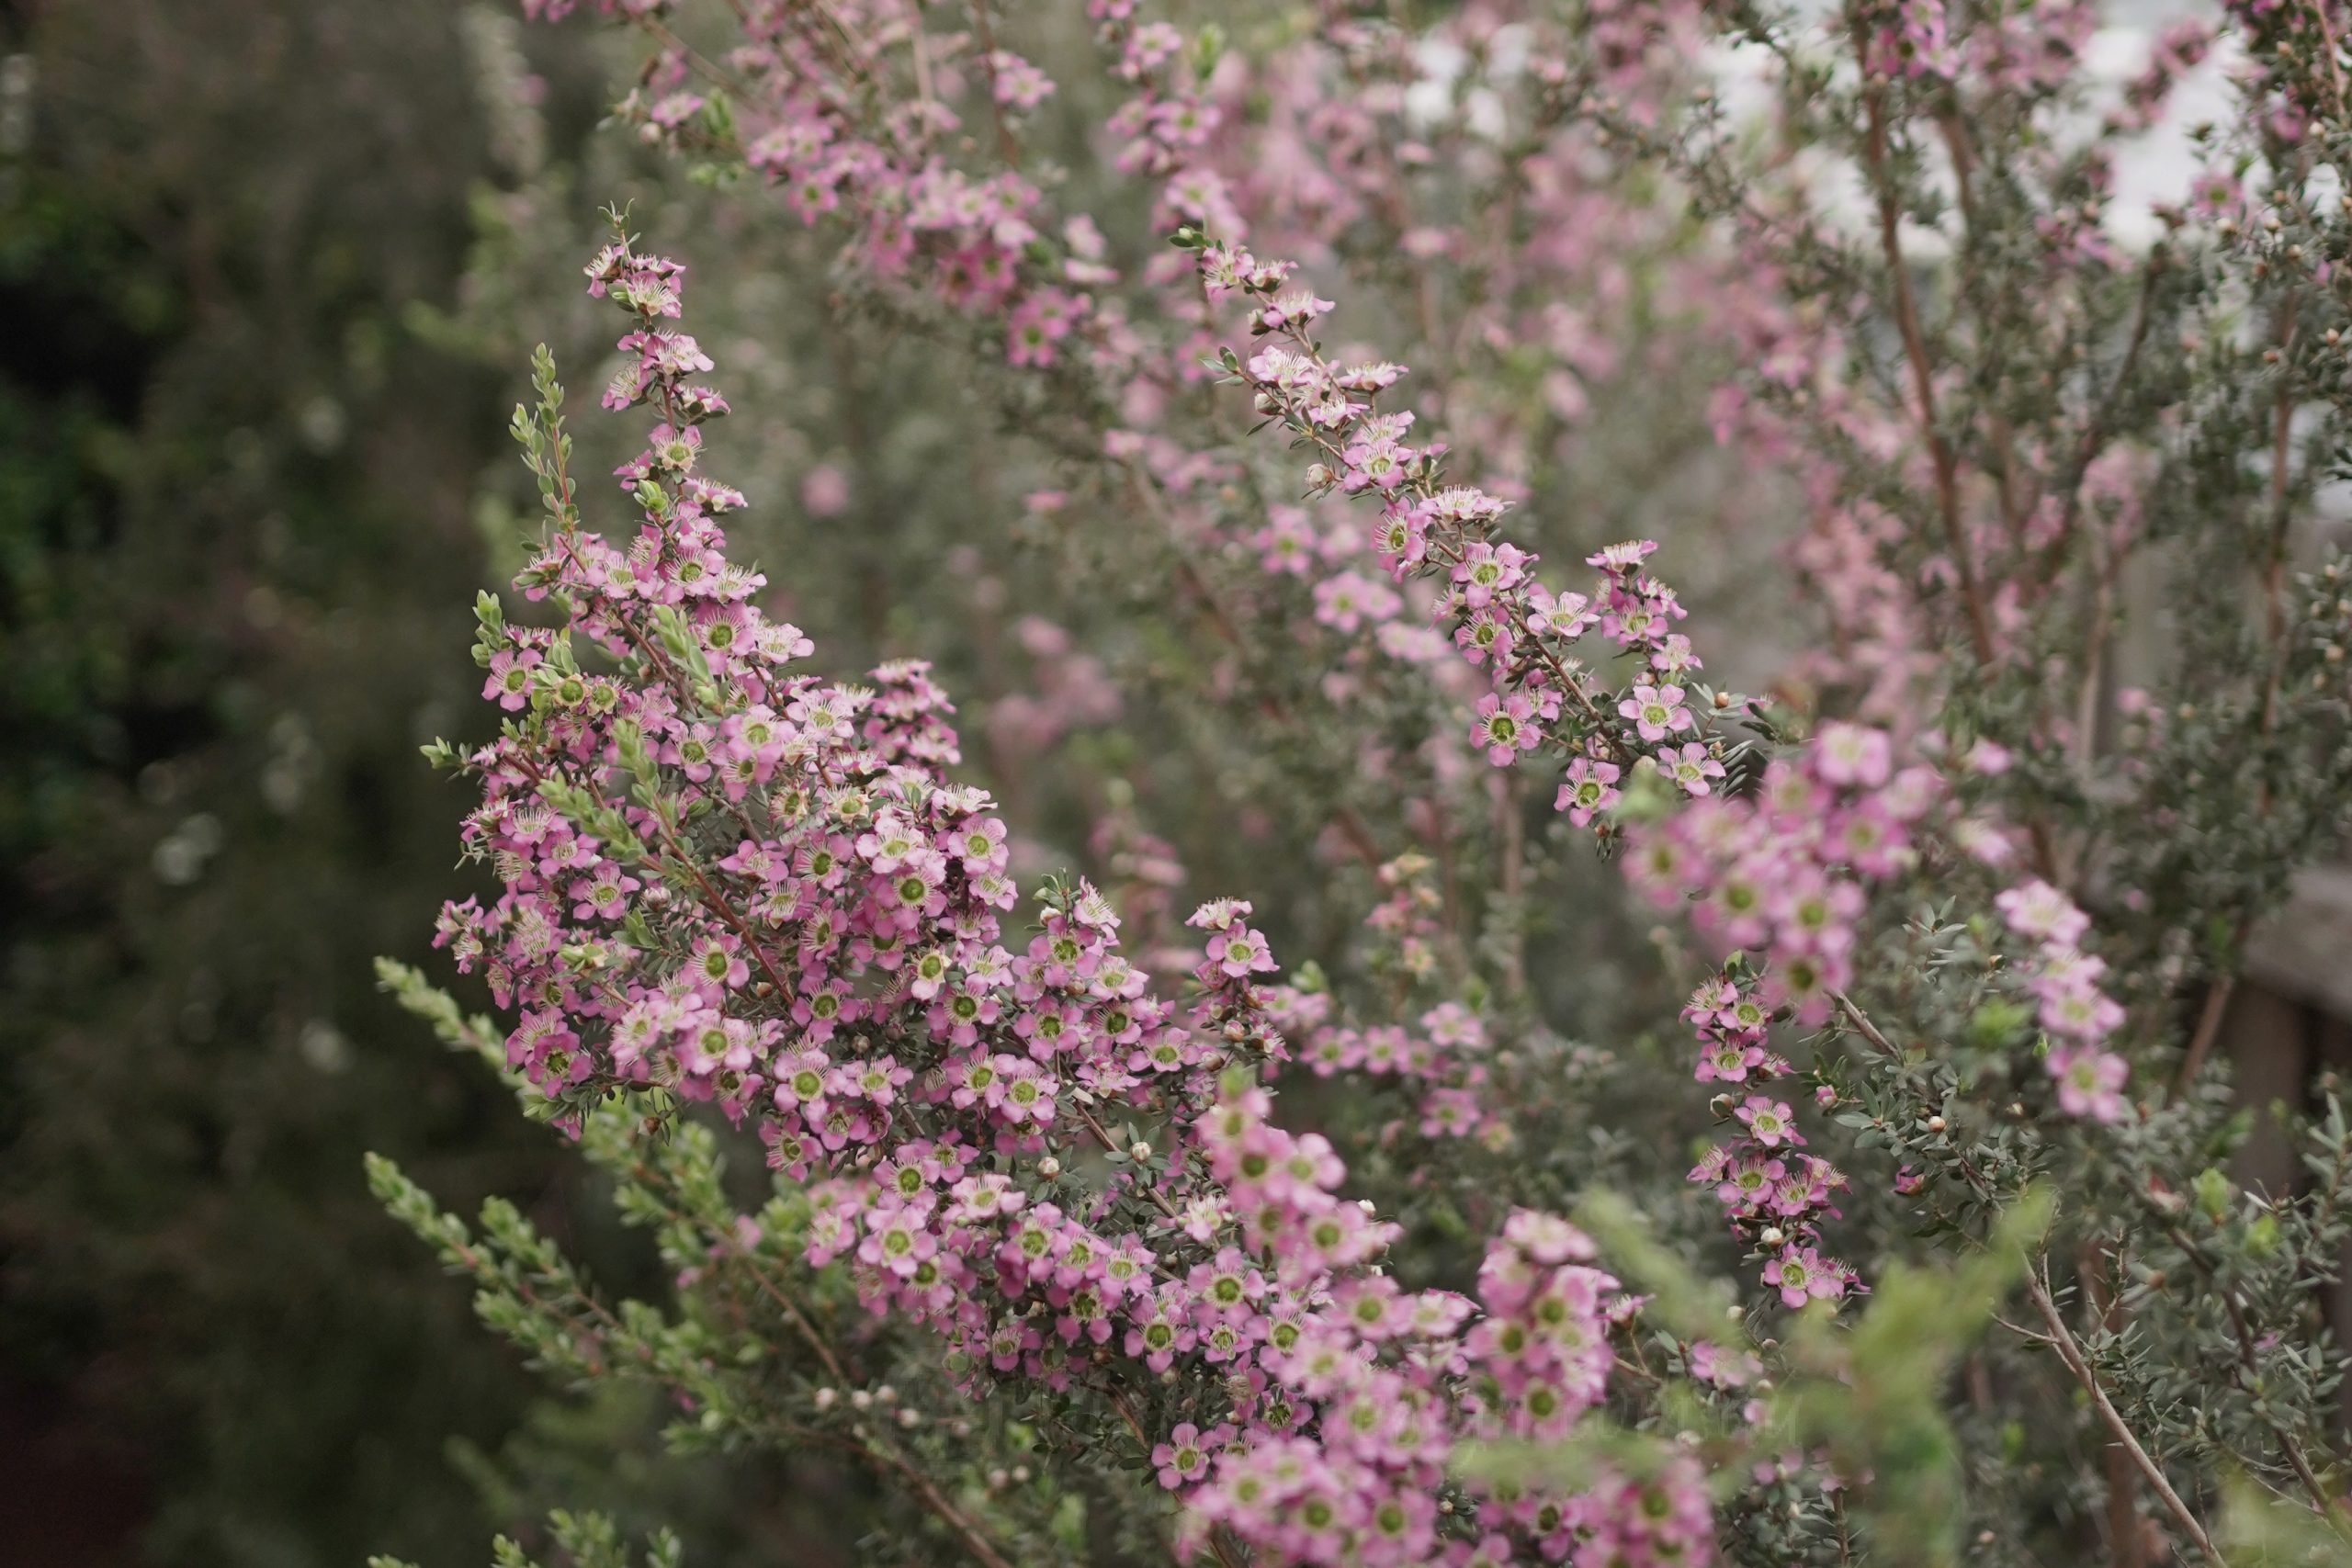 Privacy with punch: Leptospermum lanigerum ‘Seclusion’